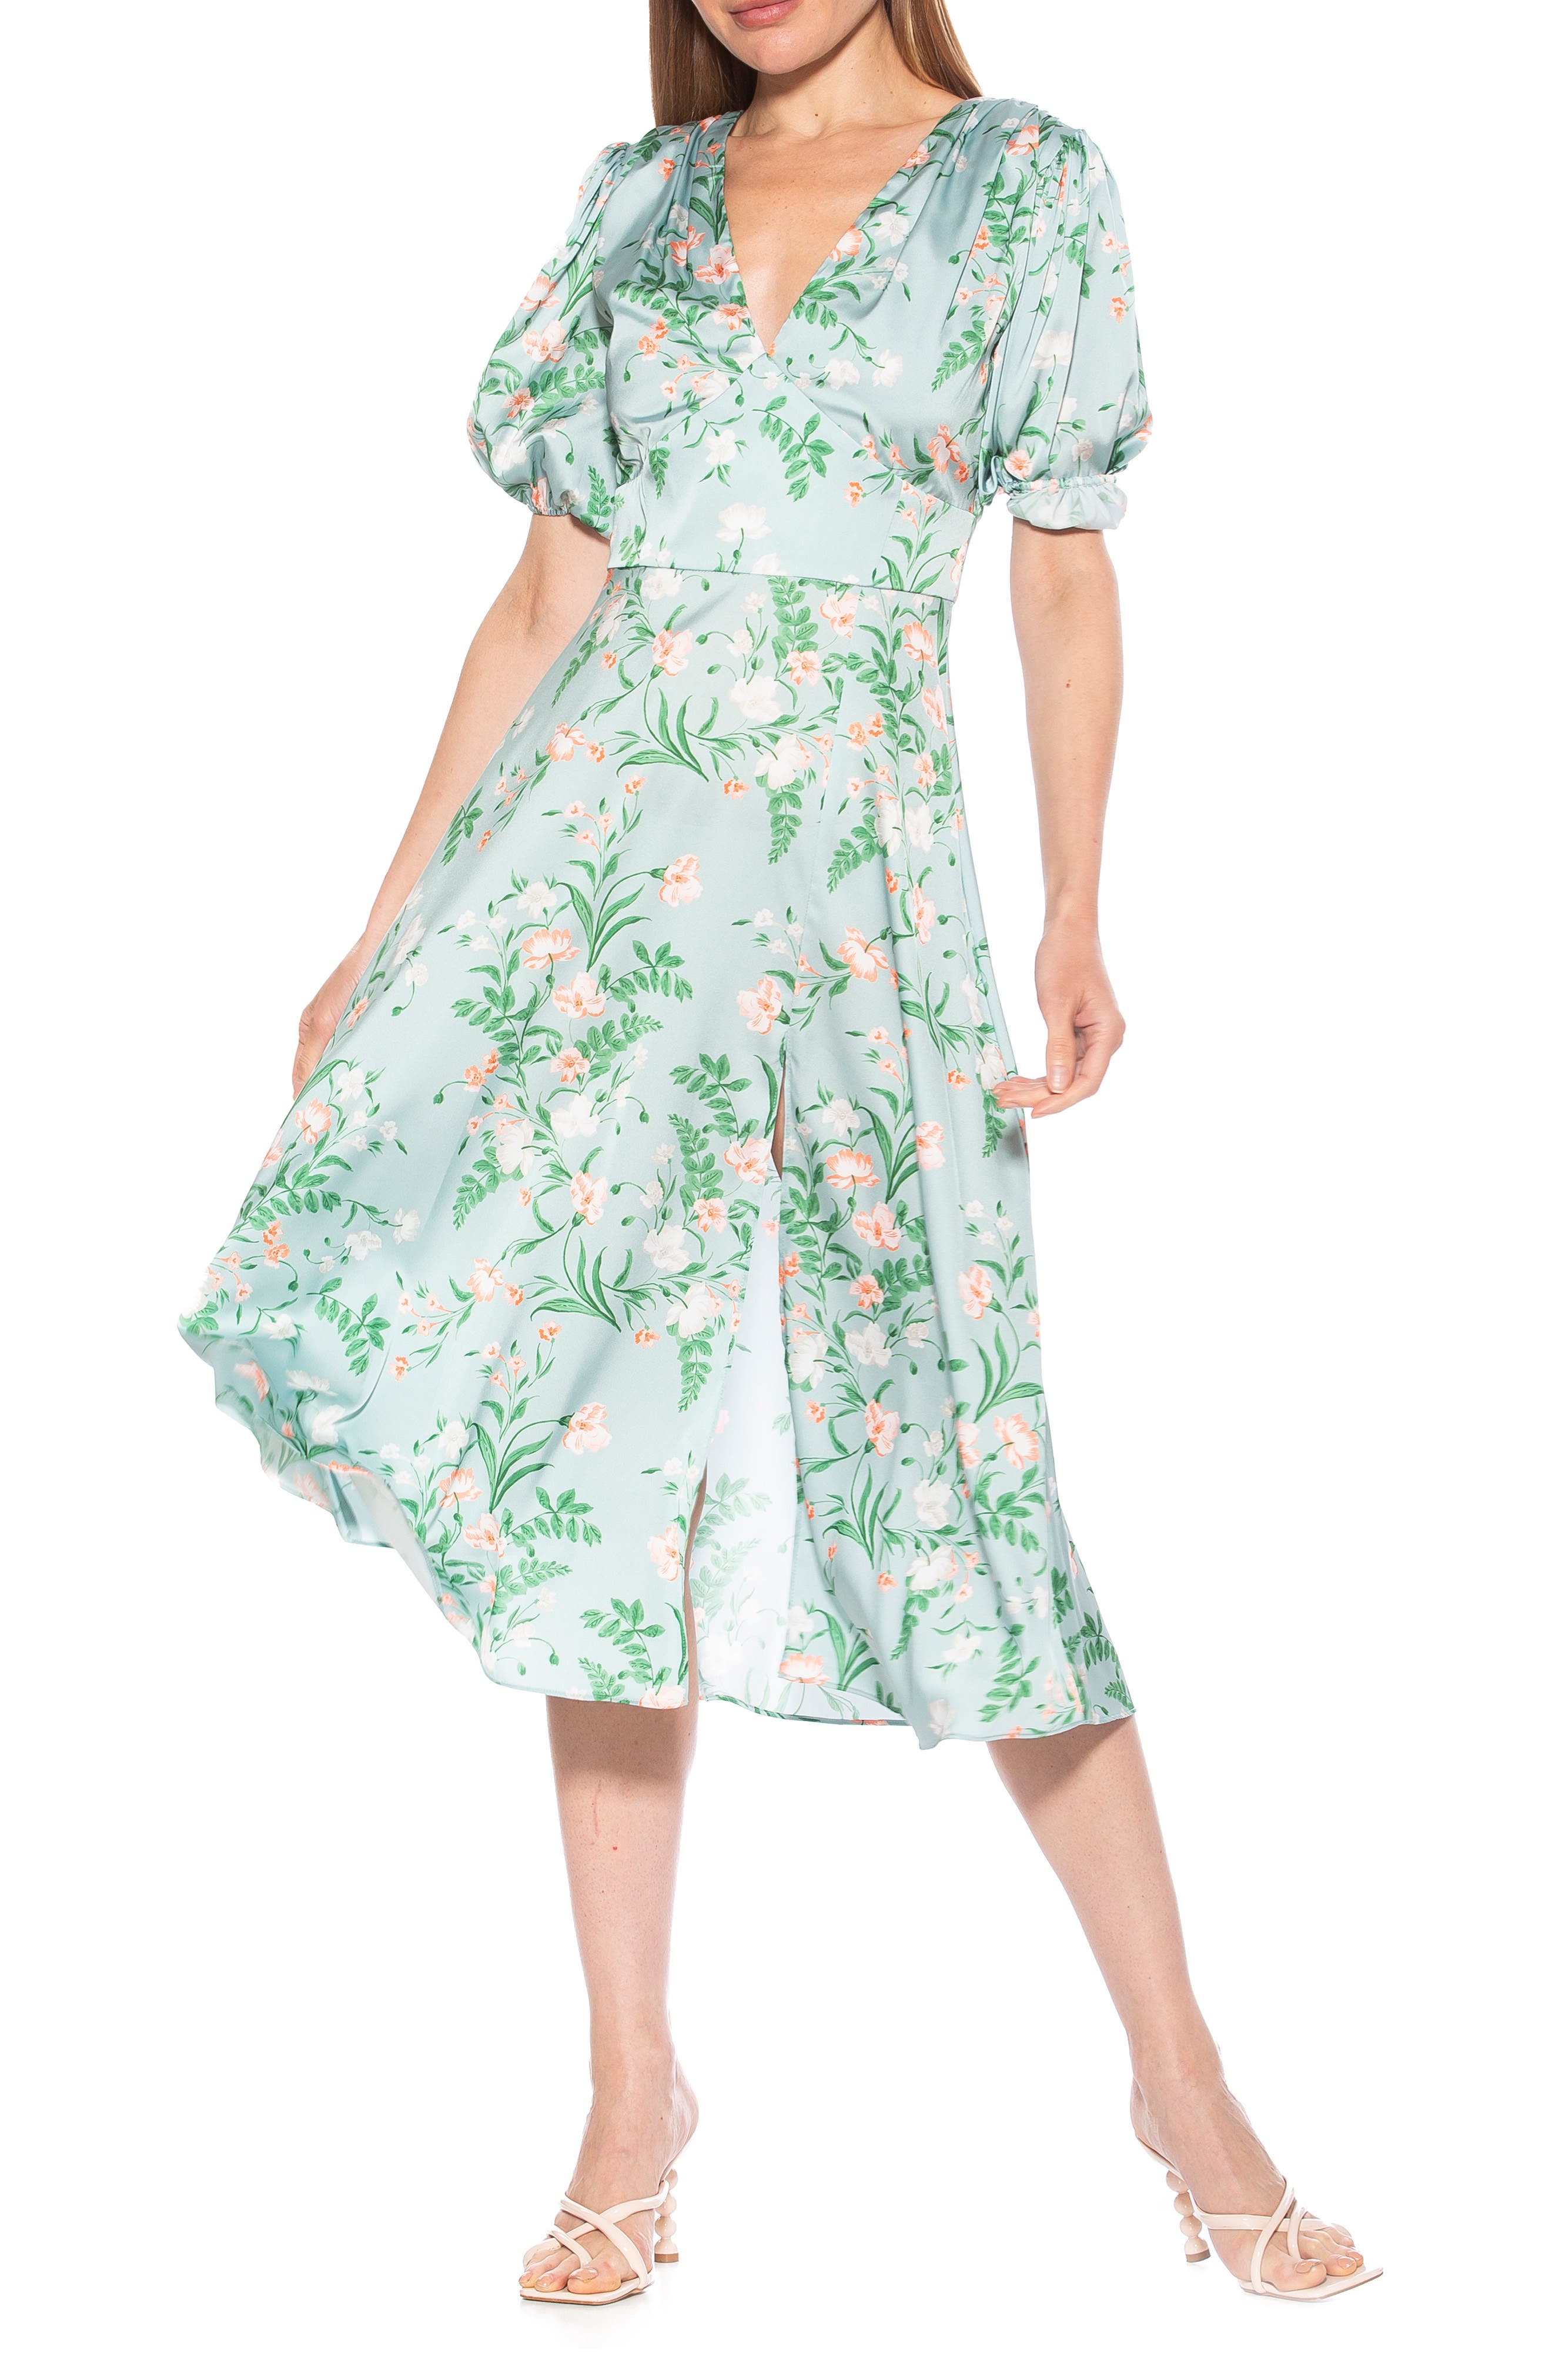 1940s Fashion Advice for Tall Women Alexia Admor V-Neck Puff Sleeve Midi Dress in Sage Floral at Nordstrom Rack Size 14 $79.97 AT vintagedancer.com